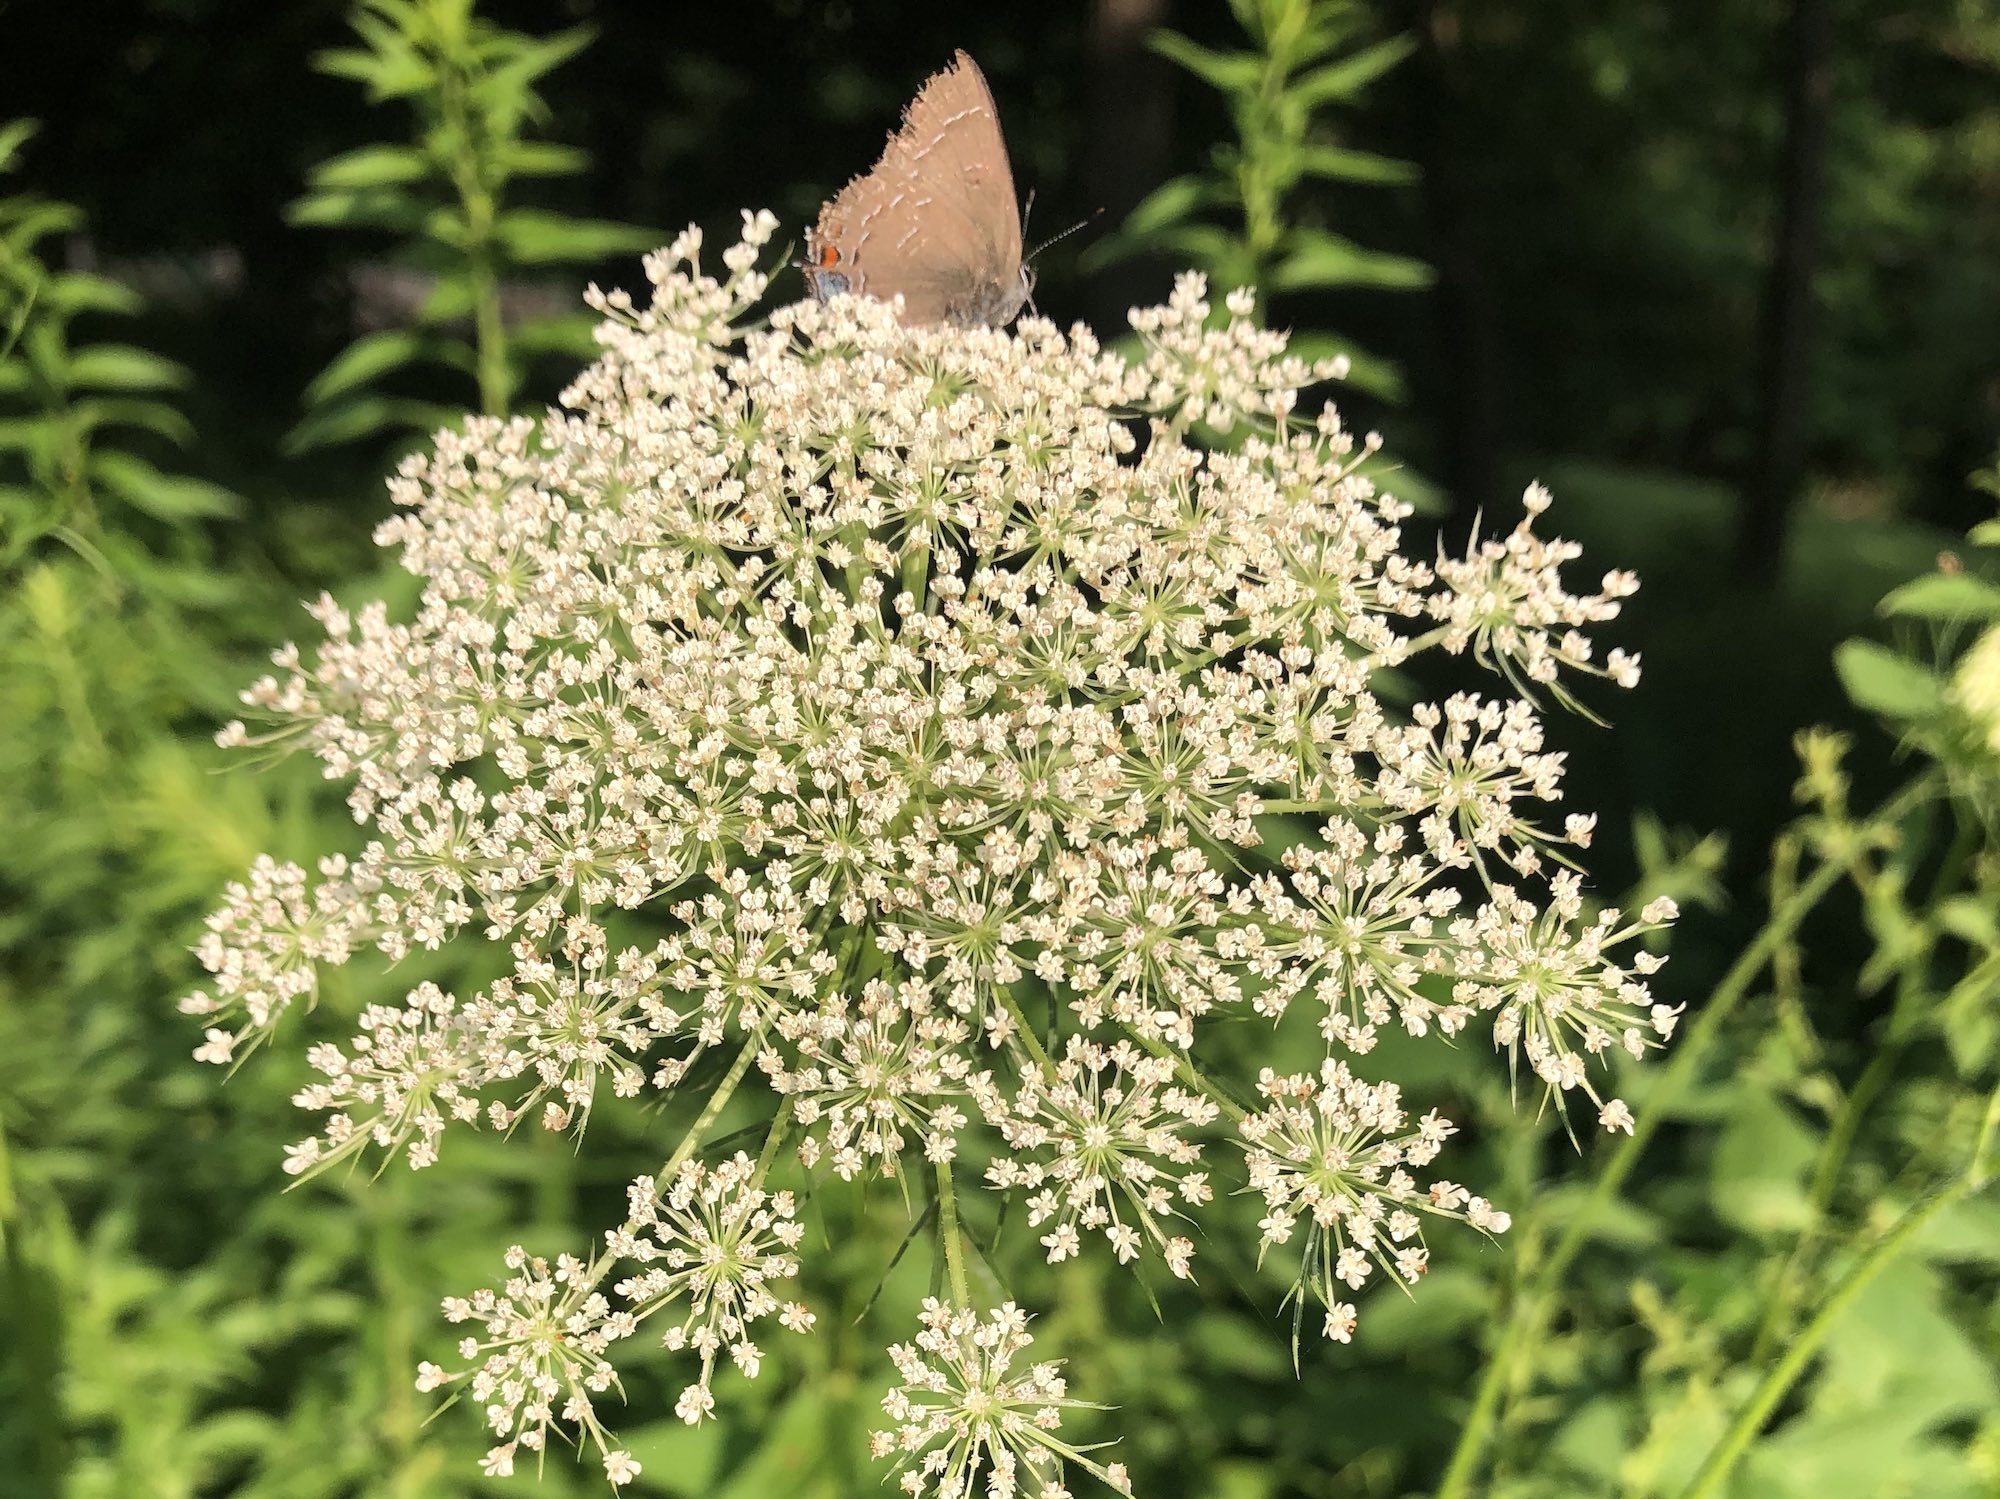 Hickory Hairstreak on Queen Anne's Lace on July 9, 2020.